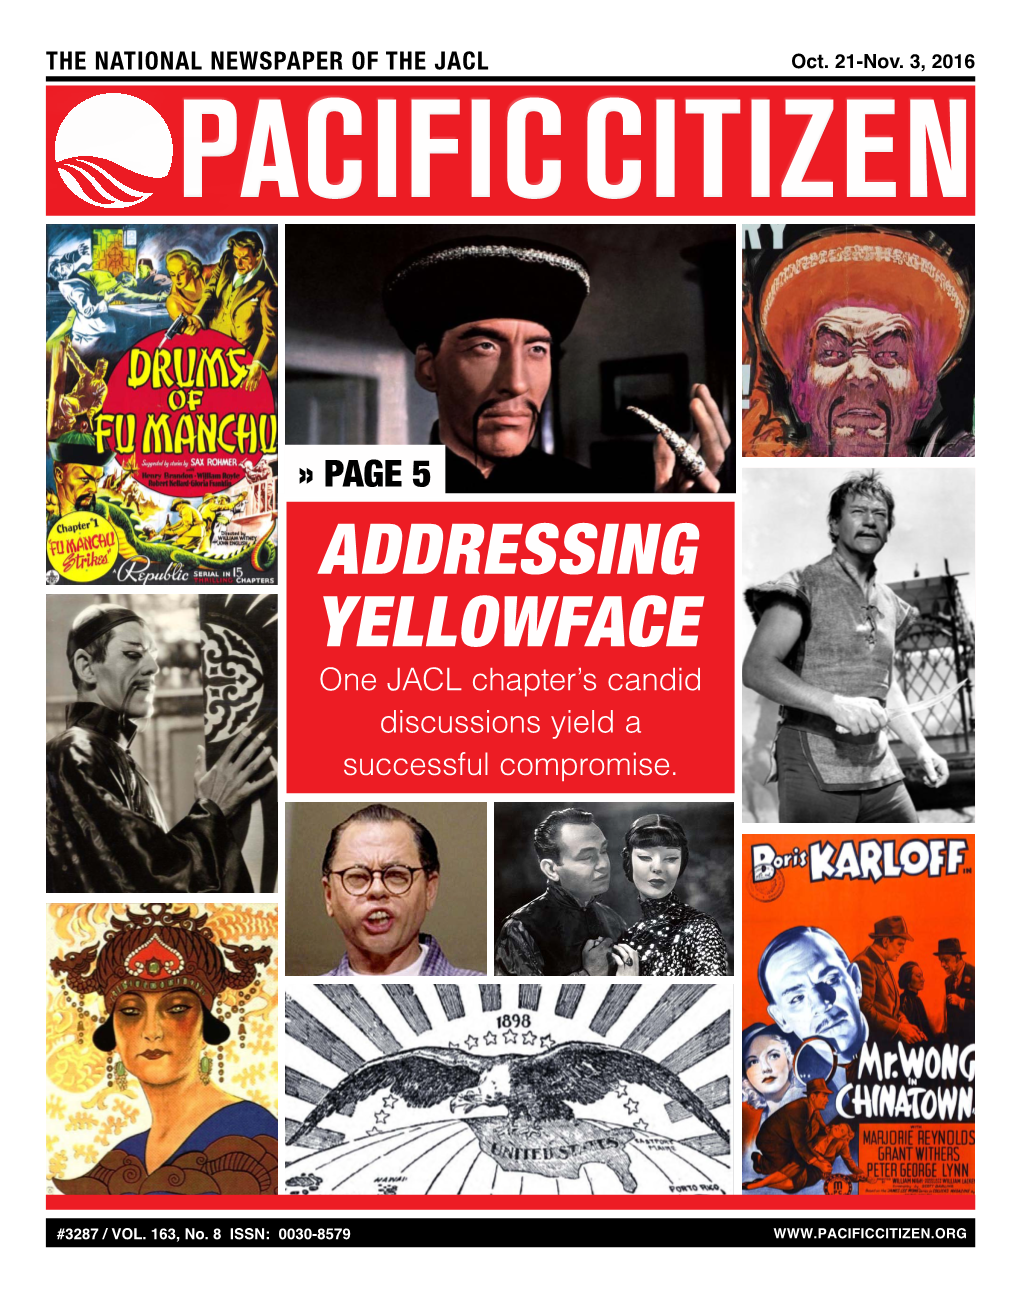 ADDRESSING YELLOWFACE One JACL Chapter’S Candid Discussions Yield a Successful Compromise